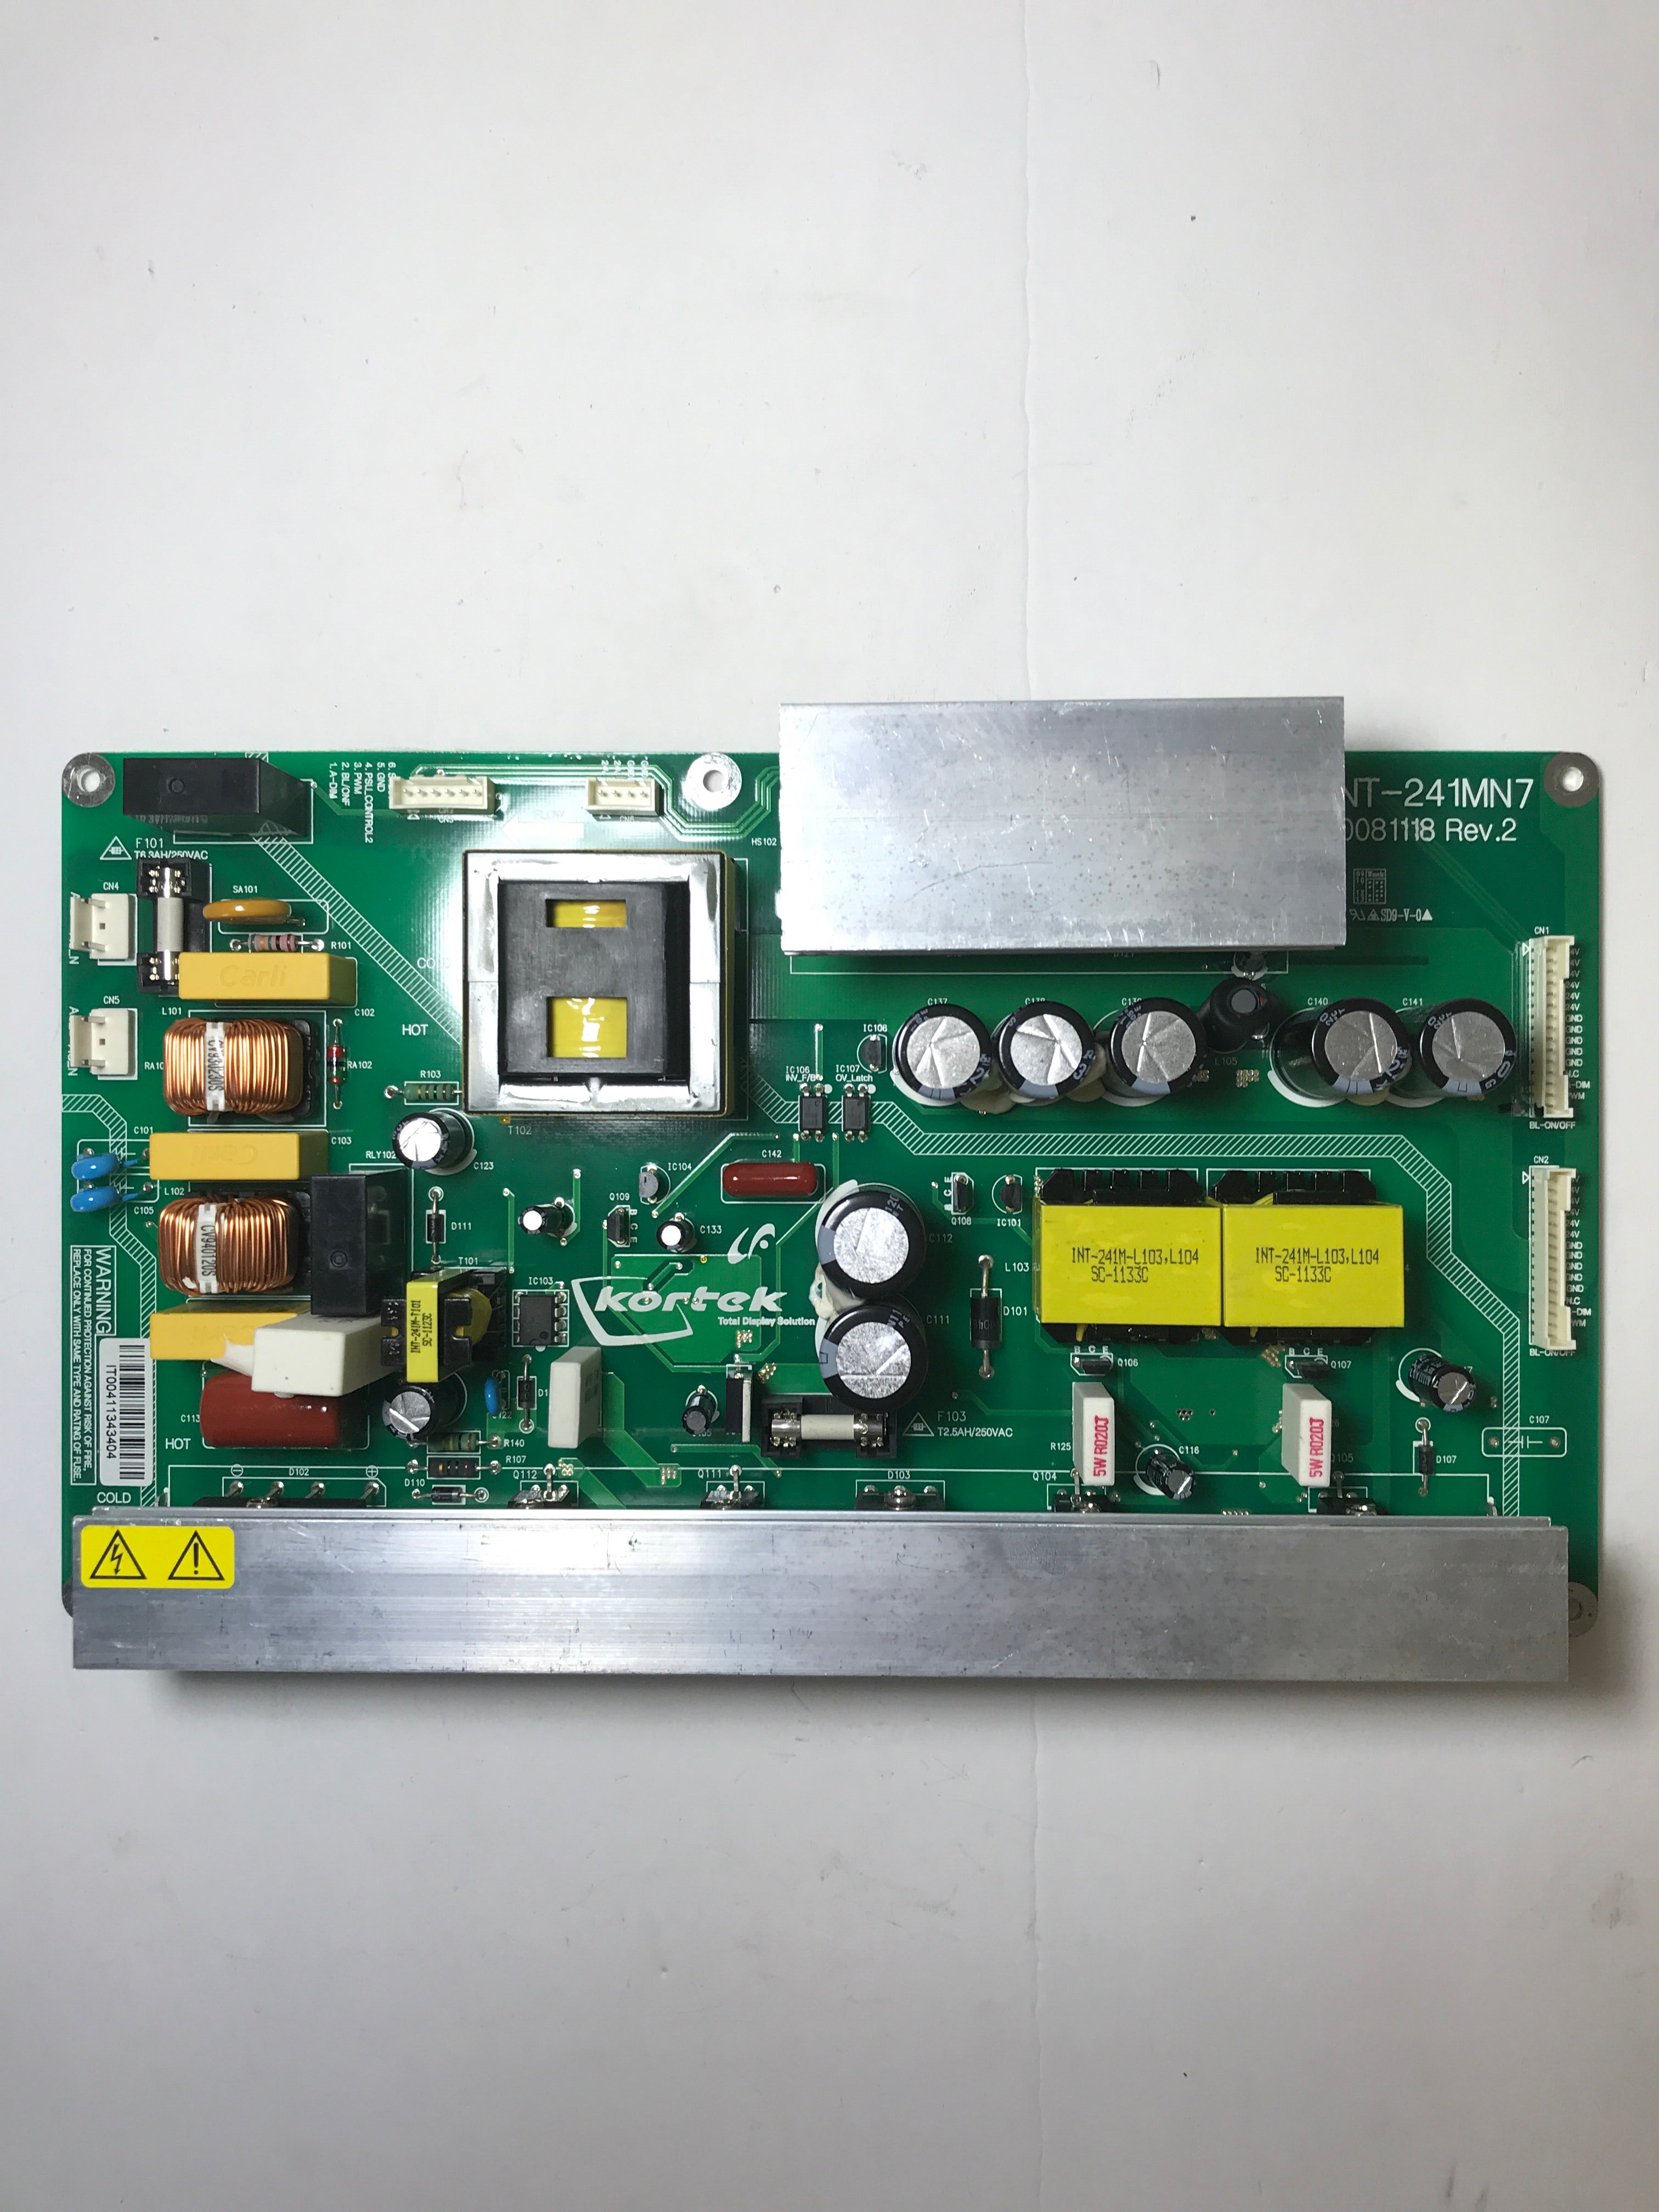 NEC INT-241MN7 Power Supply Unit for L709NG P701